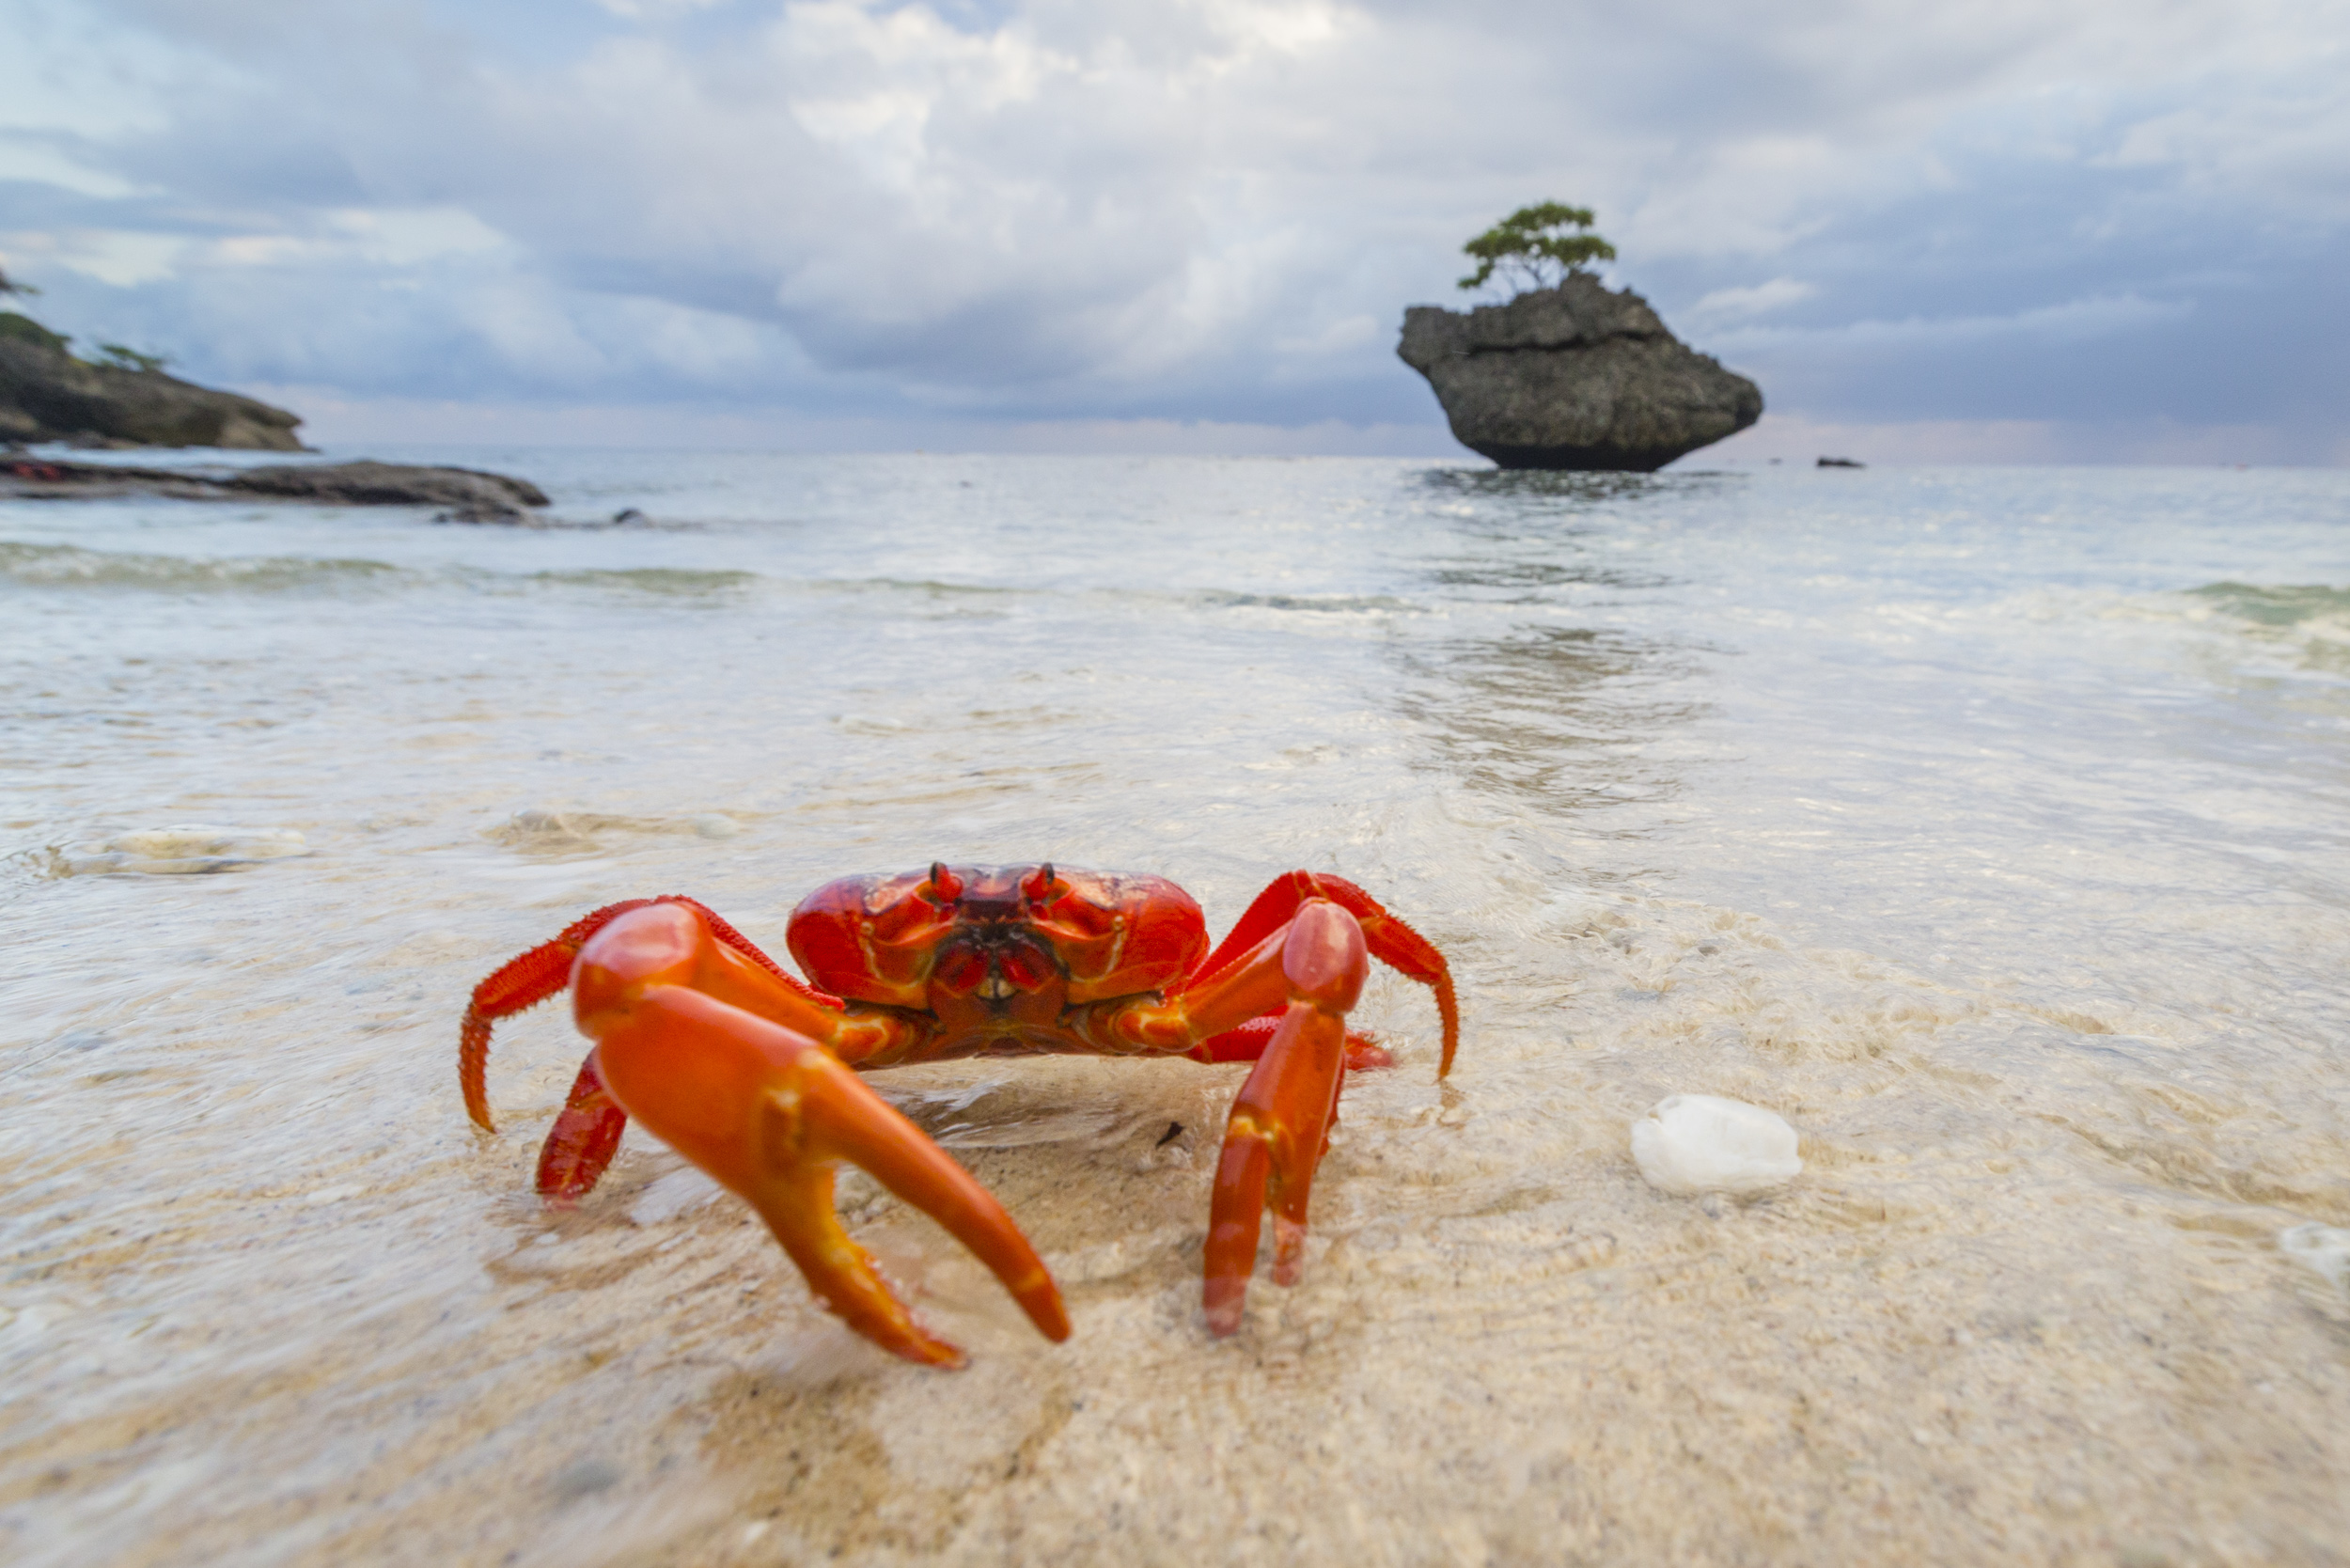 Free flights to Christmas Island to see the red crabs